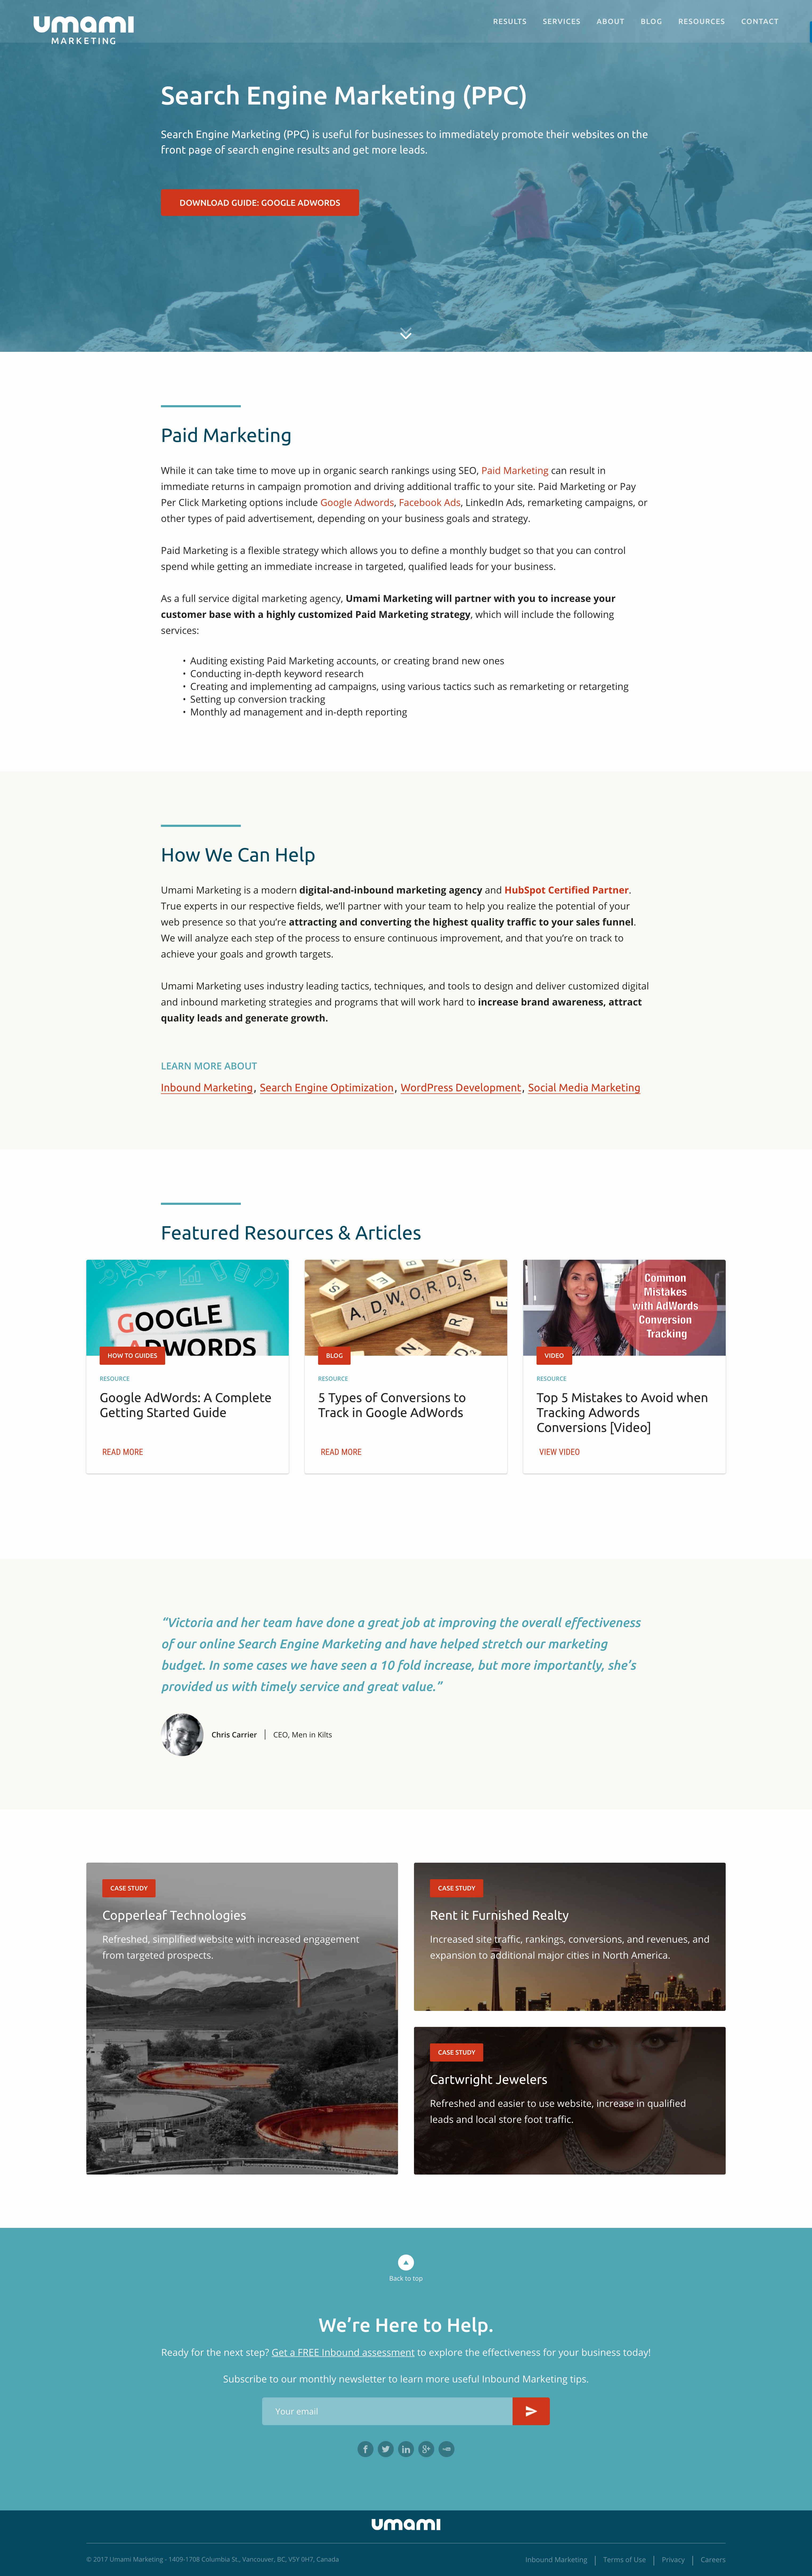 Umami New Paid Marketing Website Page.png